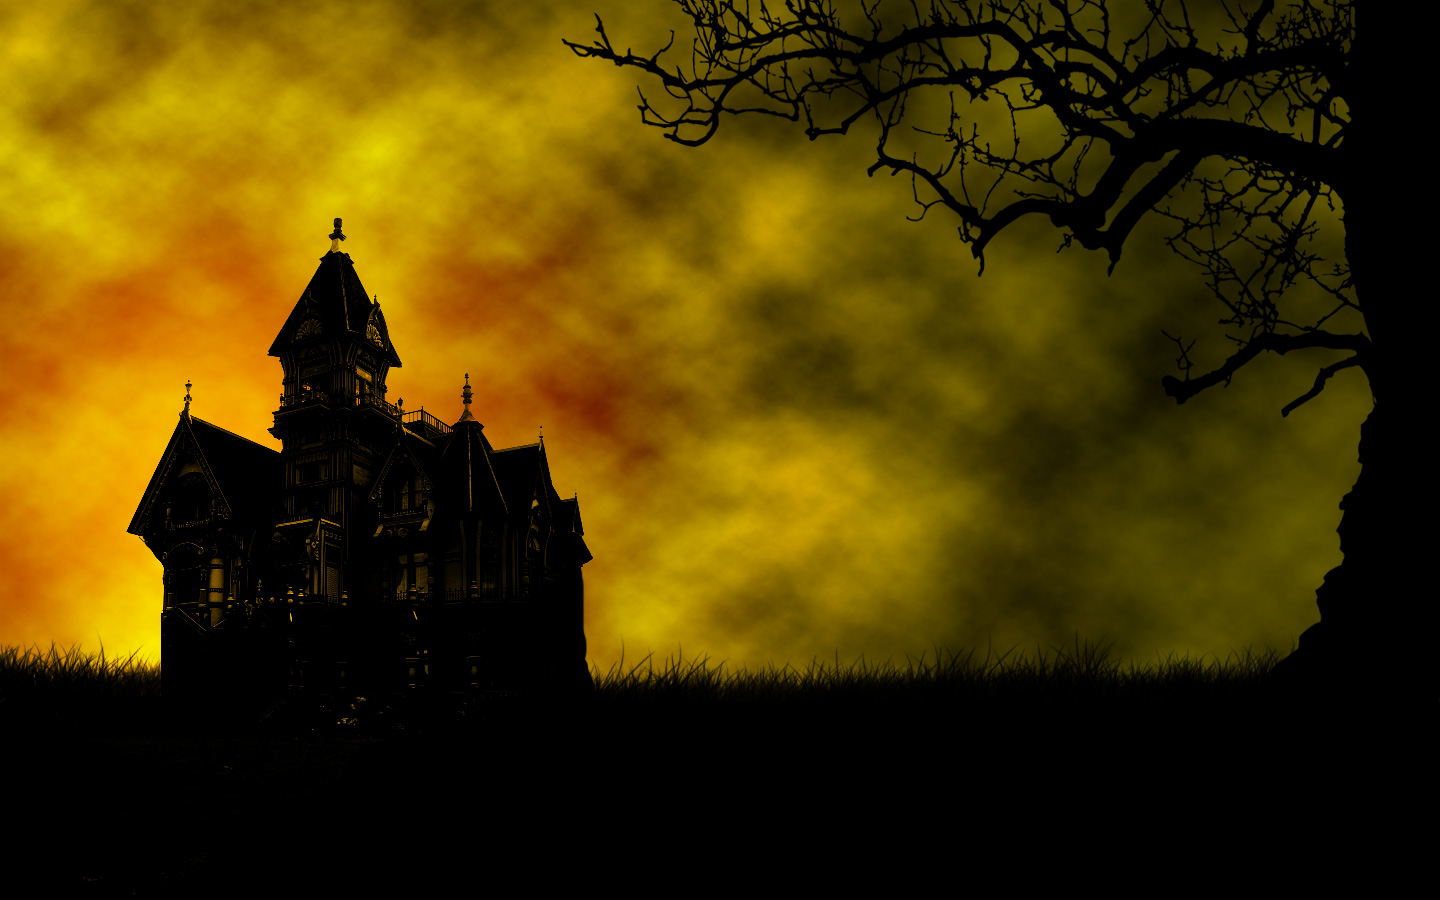  Wazoo Clothing and other Woundrous Things Halloween Haunted Houses